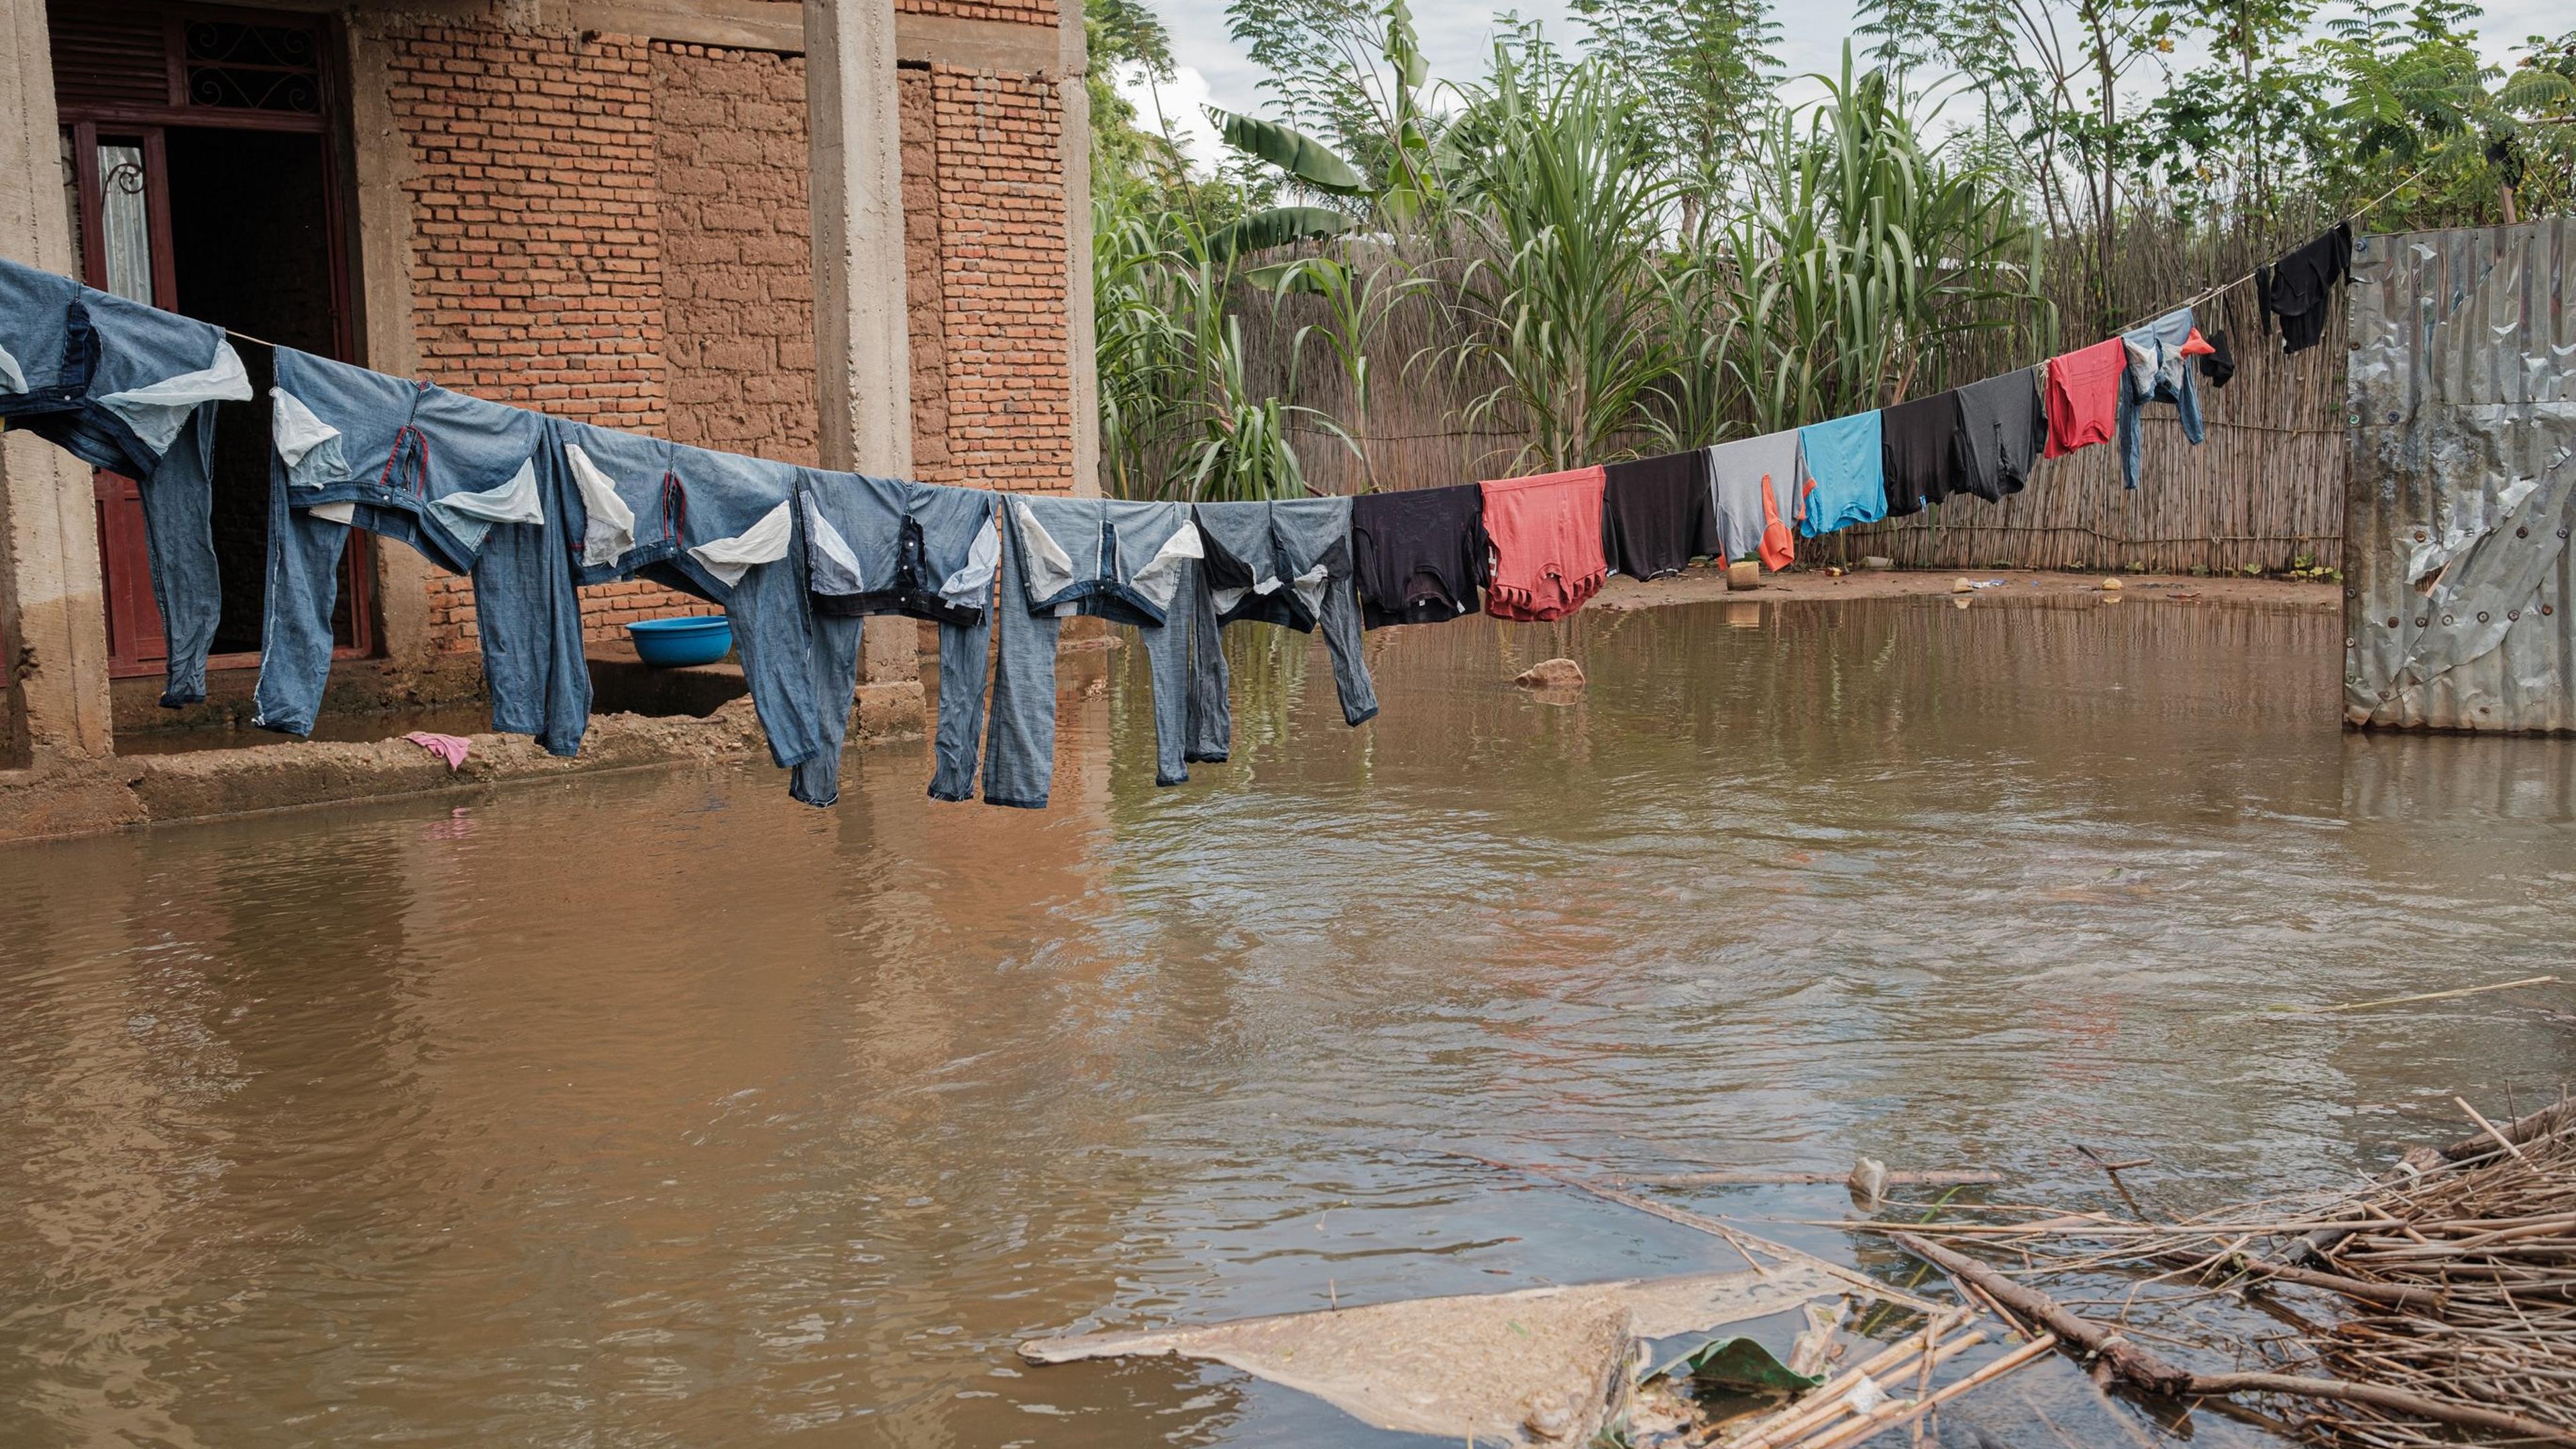 TOPSHOT - Clothes are seen while hanging to dry in an area of houses covered on water following flash floods in the Gatumba district of Bujumbura, on April 19, 2024. The government of Burundi and the United Nations have launched an appeal for financial aid to cope with the "devastating effects" of months of relentless rainfall that has displaced nearly 100,000 people. East Africa has been experiencing torrential rains in recent weeks that have cost the lives of at least 58 people in Tanzania in the first half of April, and 13 people in Kenya. (Photo by Tchandrou Nitanga / AFP)